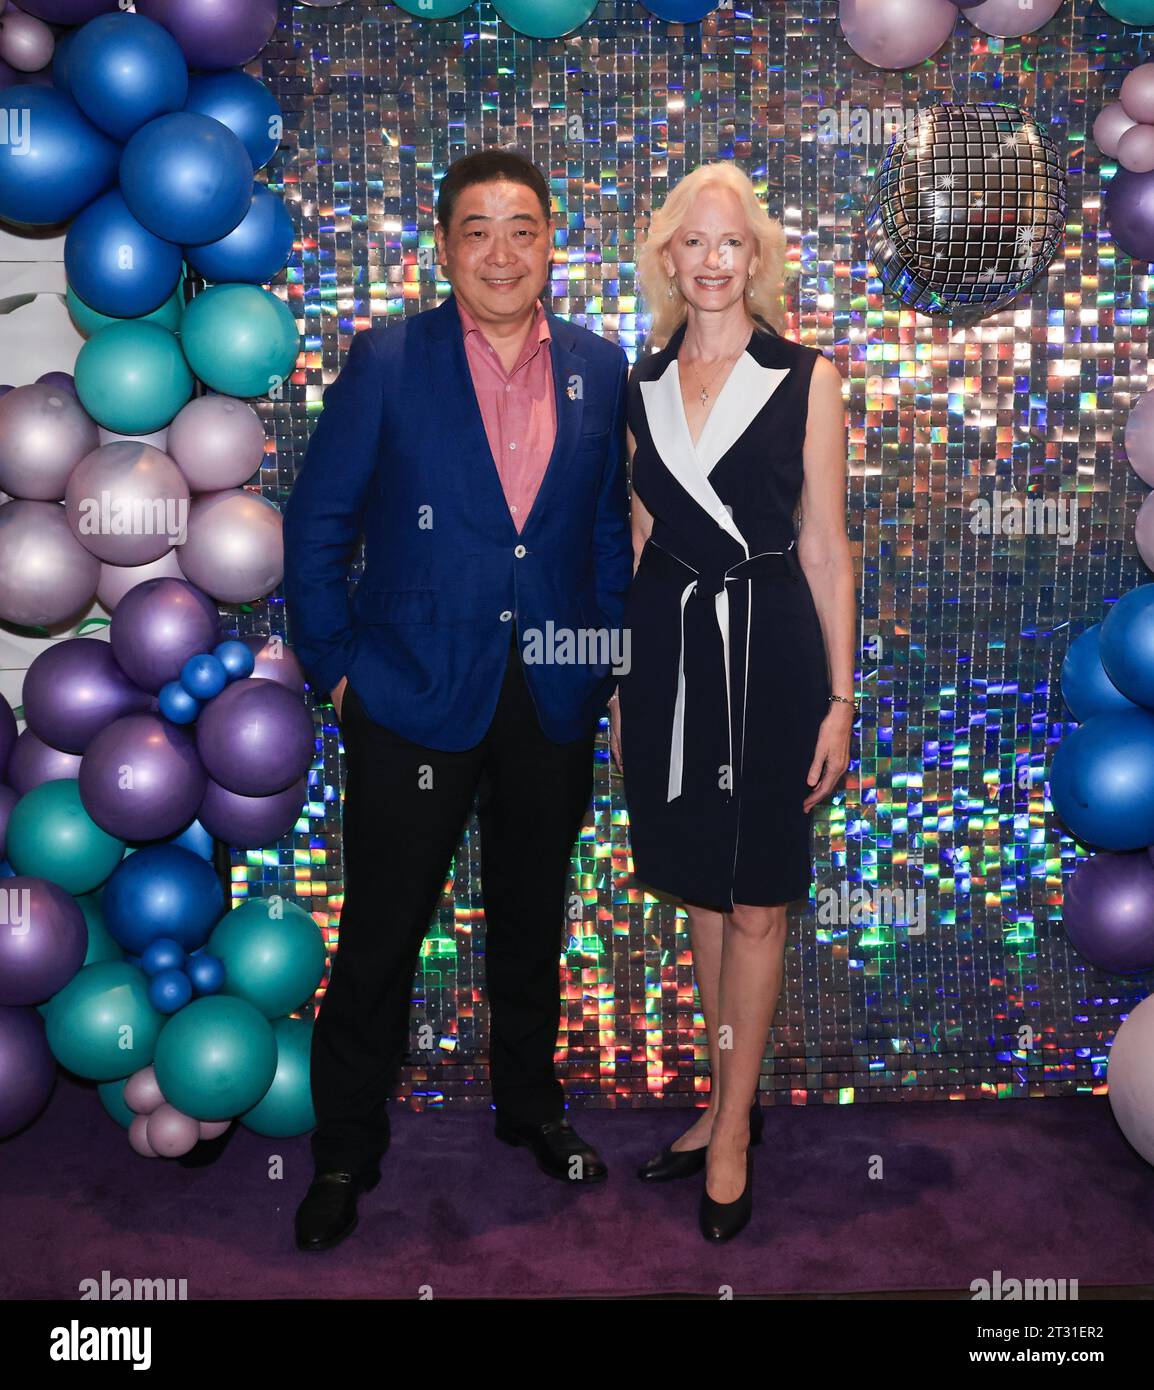 Newport Beach, California, USA. 18th October, 2023. TV host Joey Zhou and producer Kim Holland attending the screening of 'A Perfect Love' at the Newport Beach Film Festival in Newport Beach, California on October 18th, 2023.  Credit: Sheri Determan Stock Photo